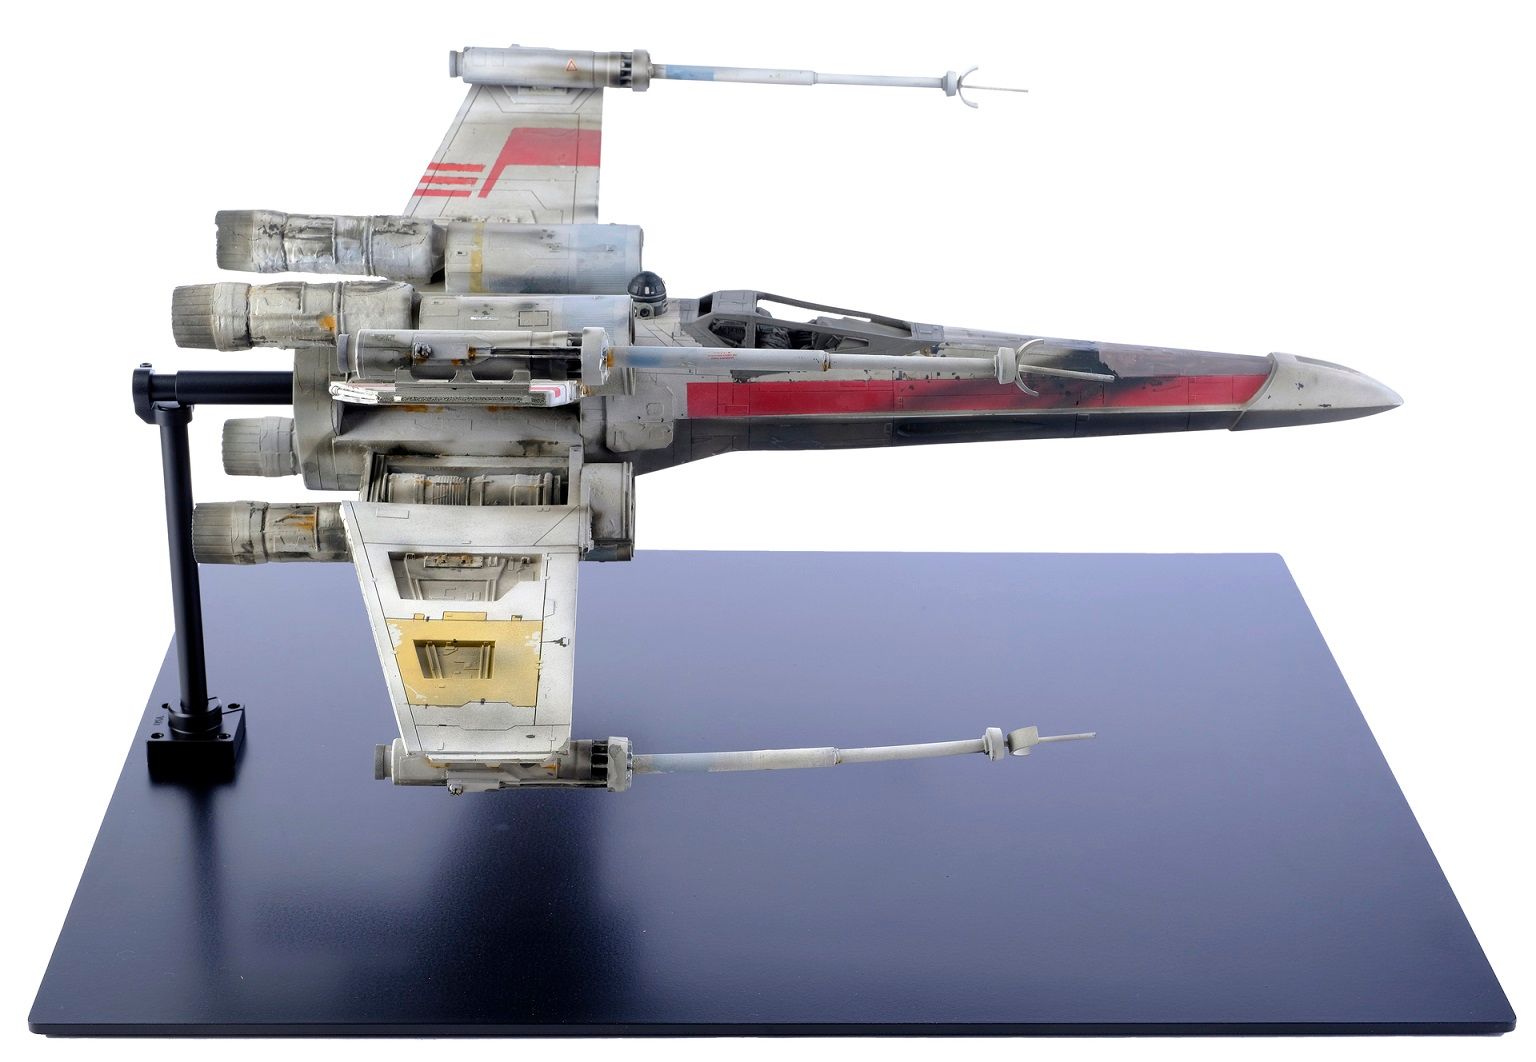 Most Expensive Star Wars Items